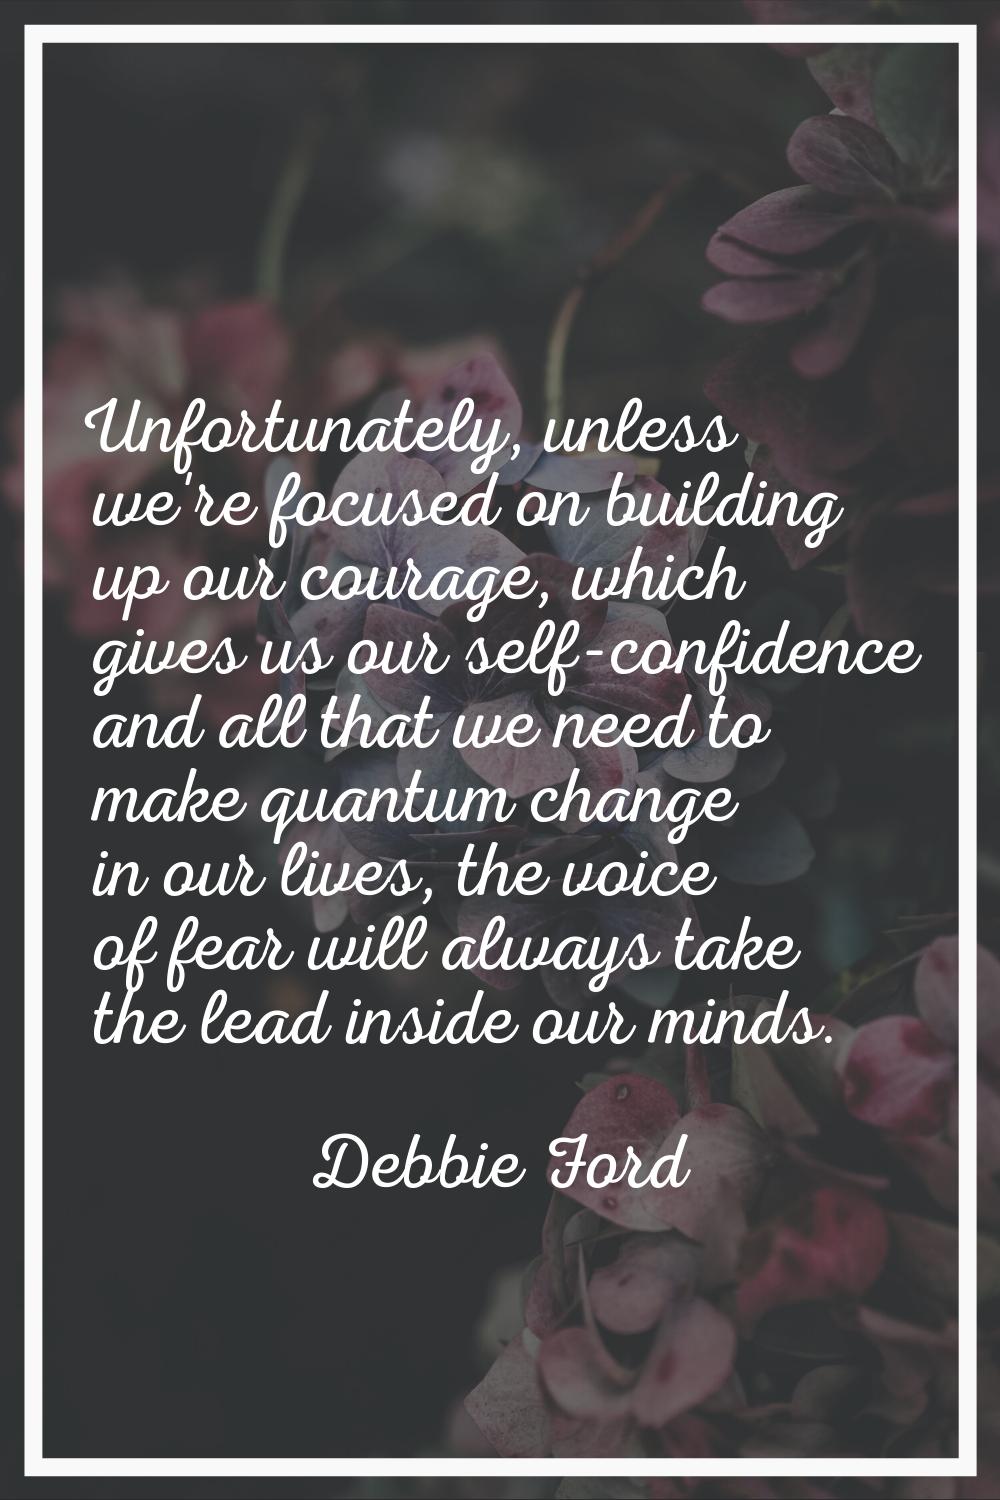 Unfortunately, unless we're focused on building up our courage, which gives us our self-confidence 